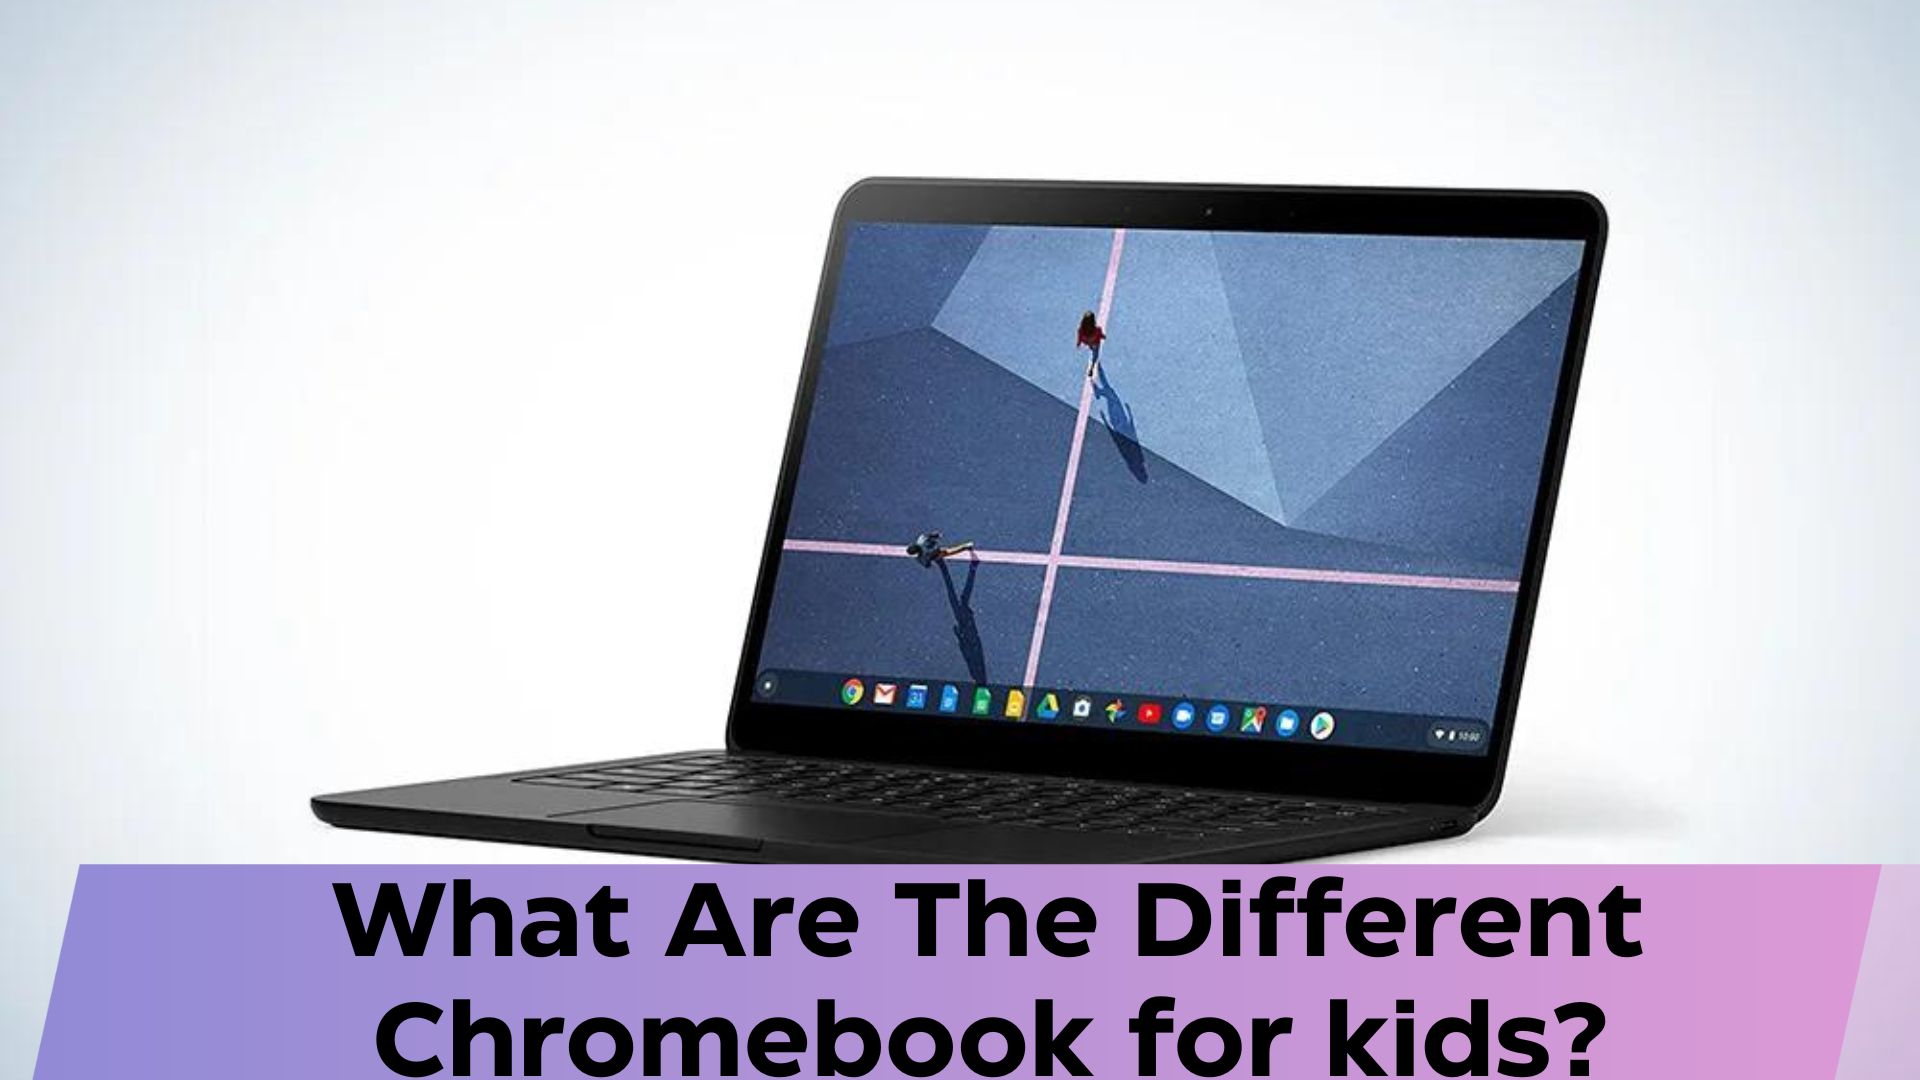 What Are The Different Chromebook for kids?